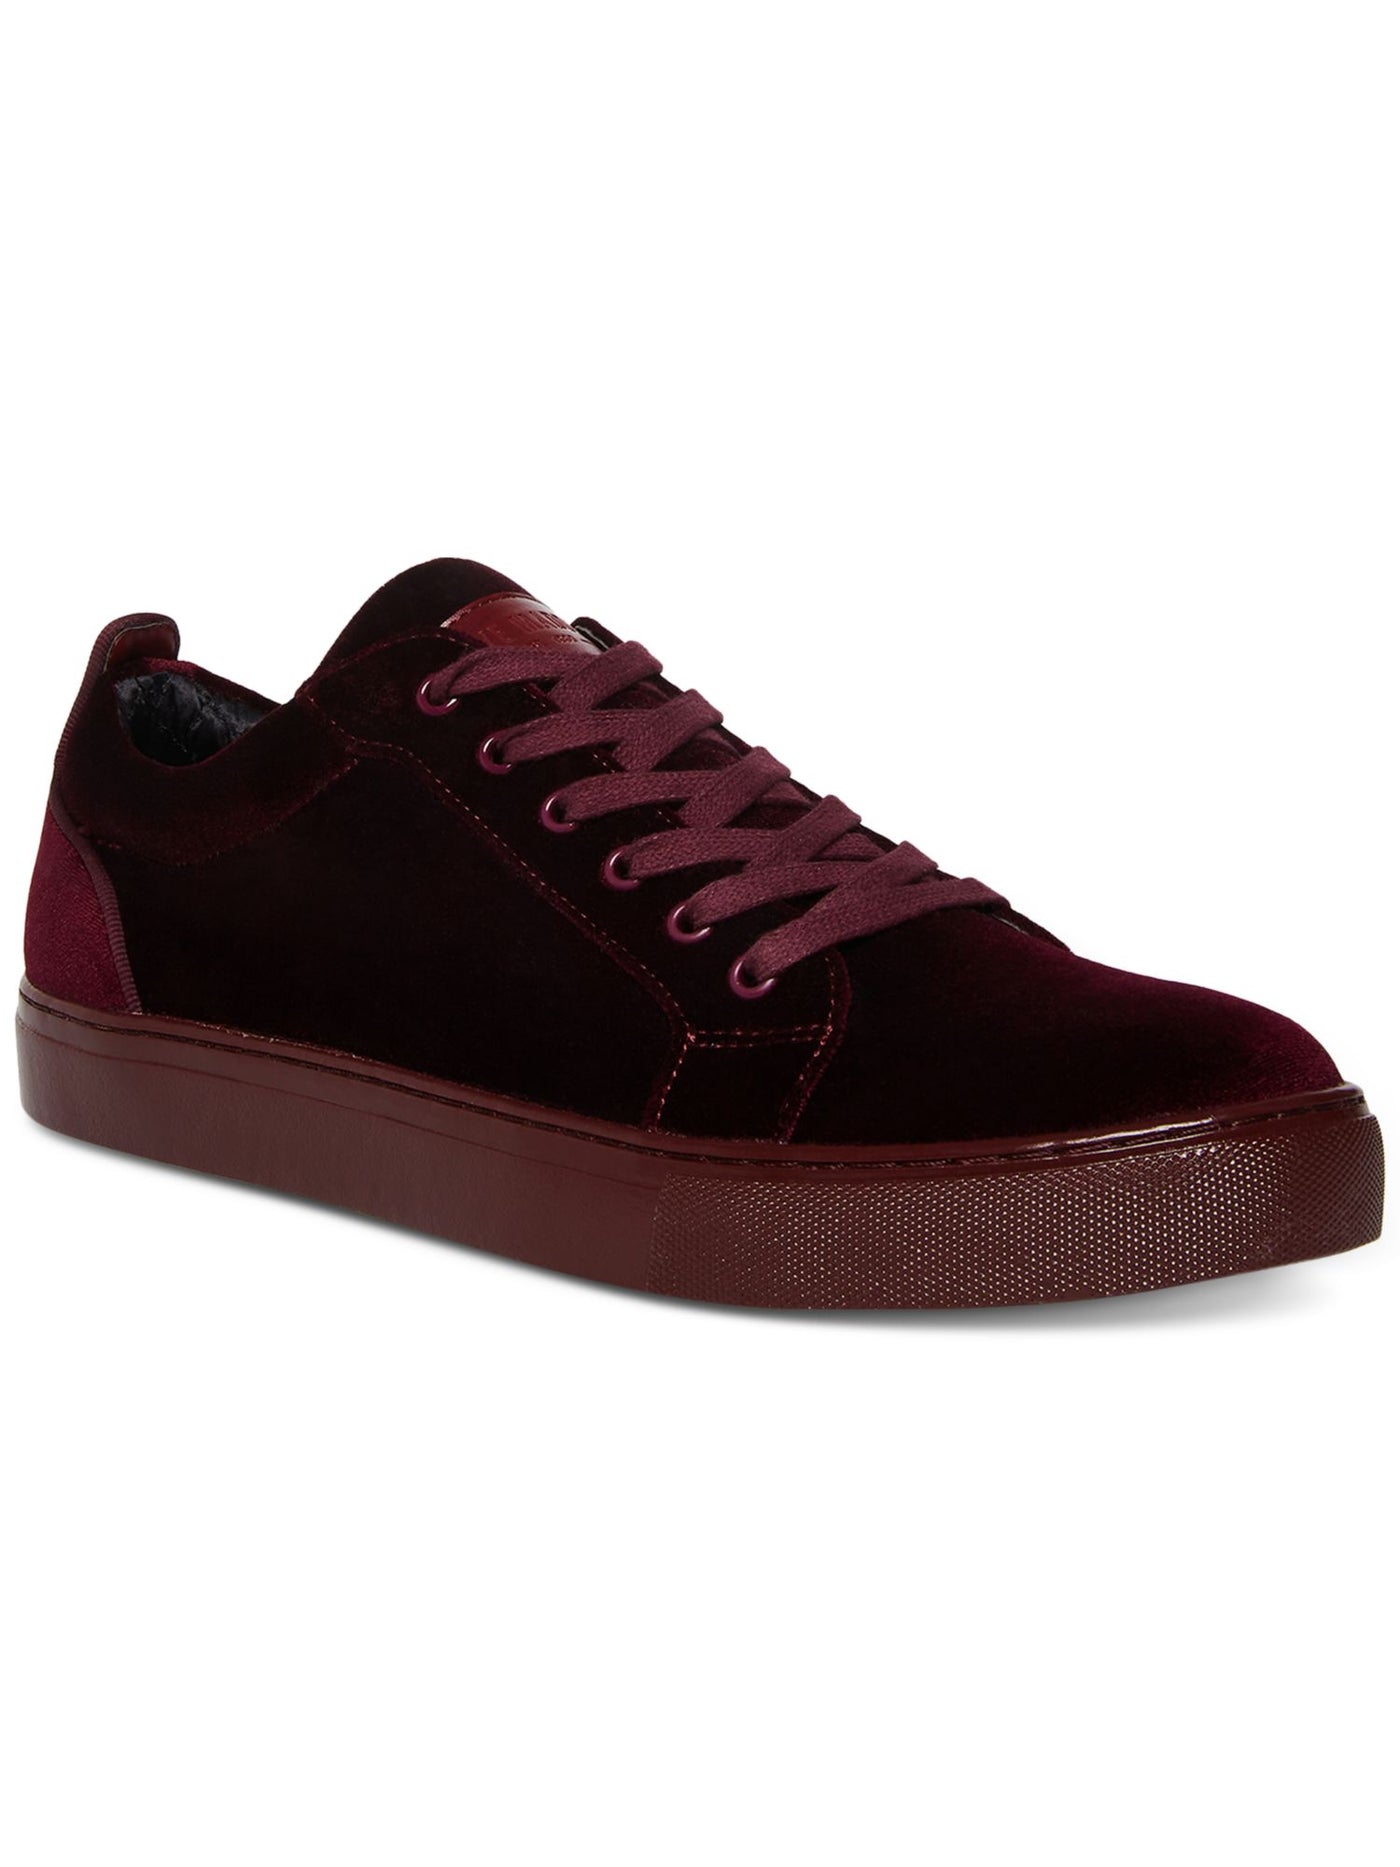 STEVE MADDEN Mens Burgundy Heel Pull Tab Yazi Round Toe Lace-Up Sneakers Shoes 10.5 M